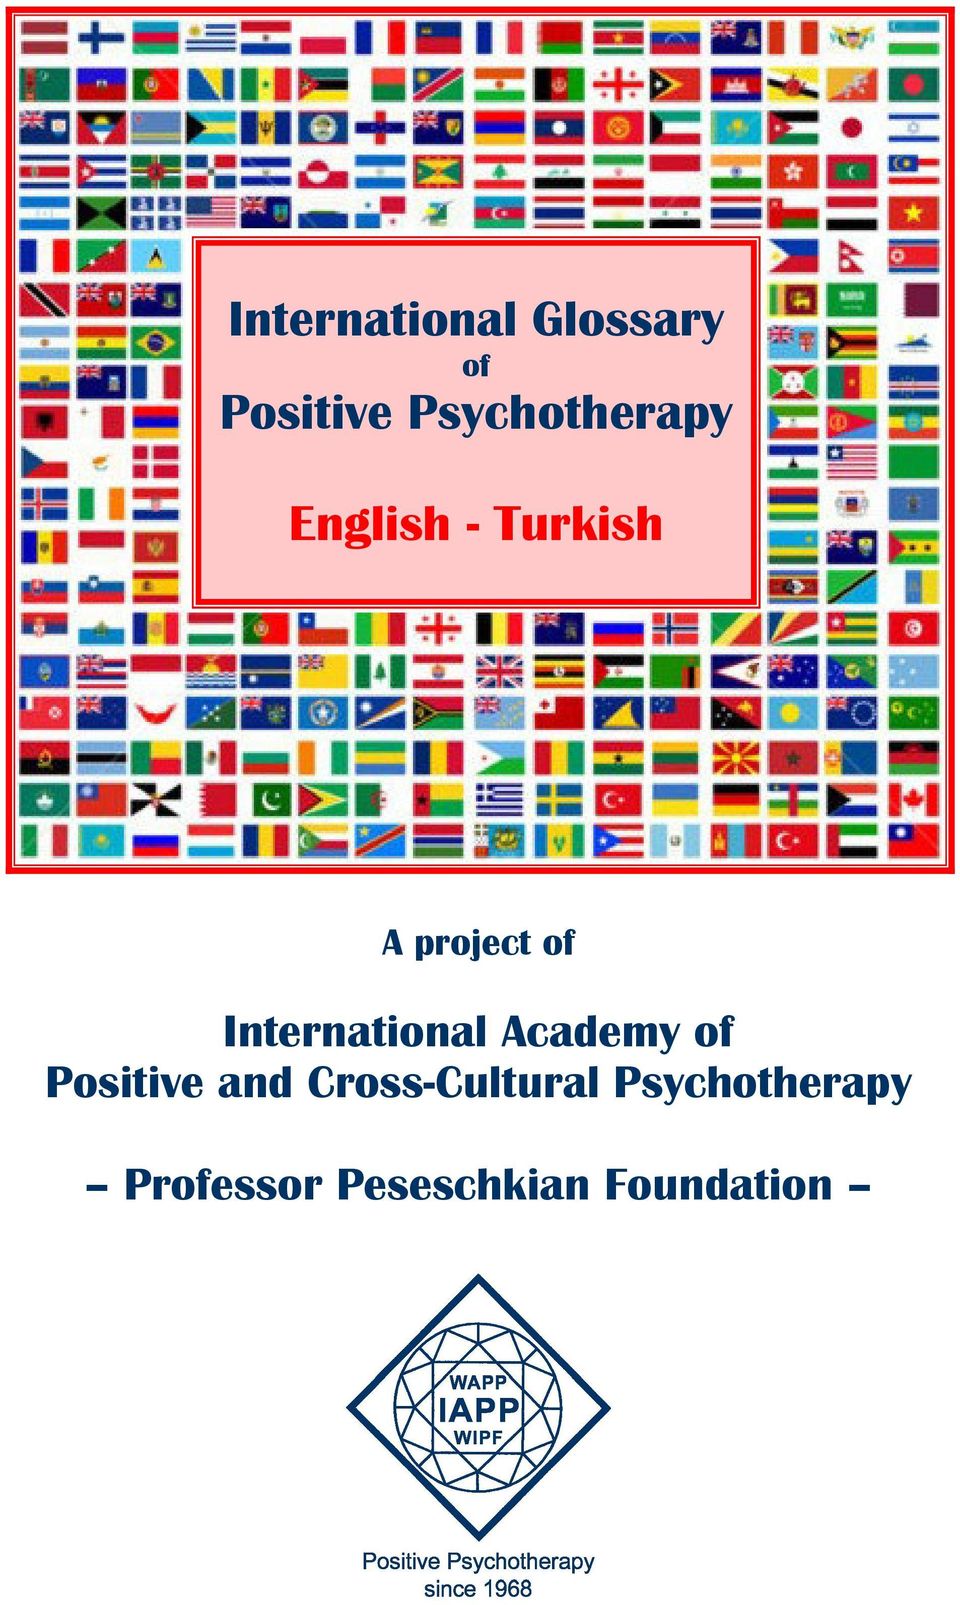 International Academy of Positive and